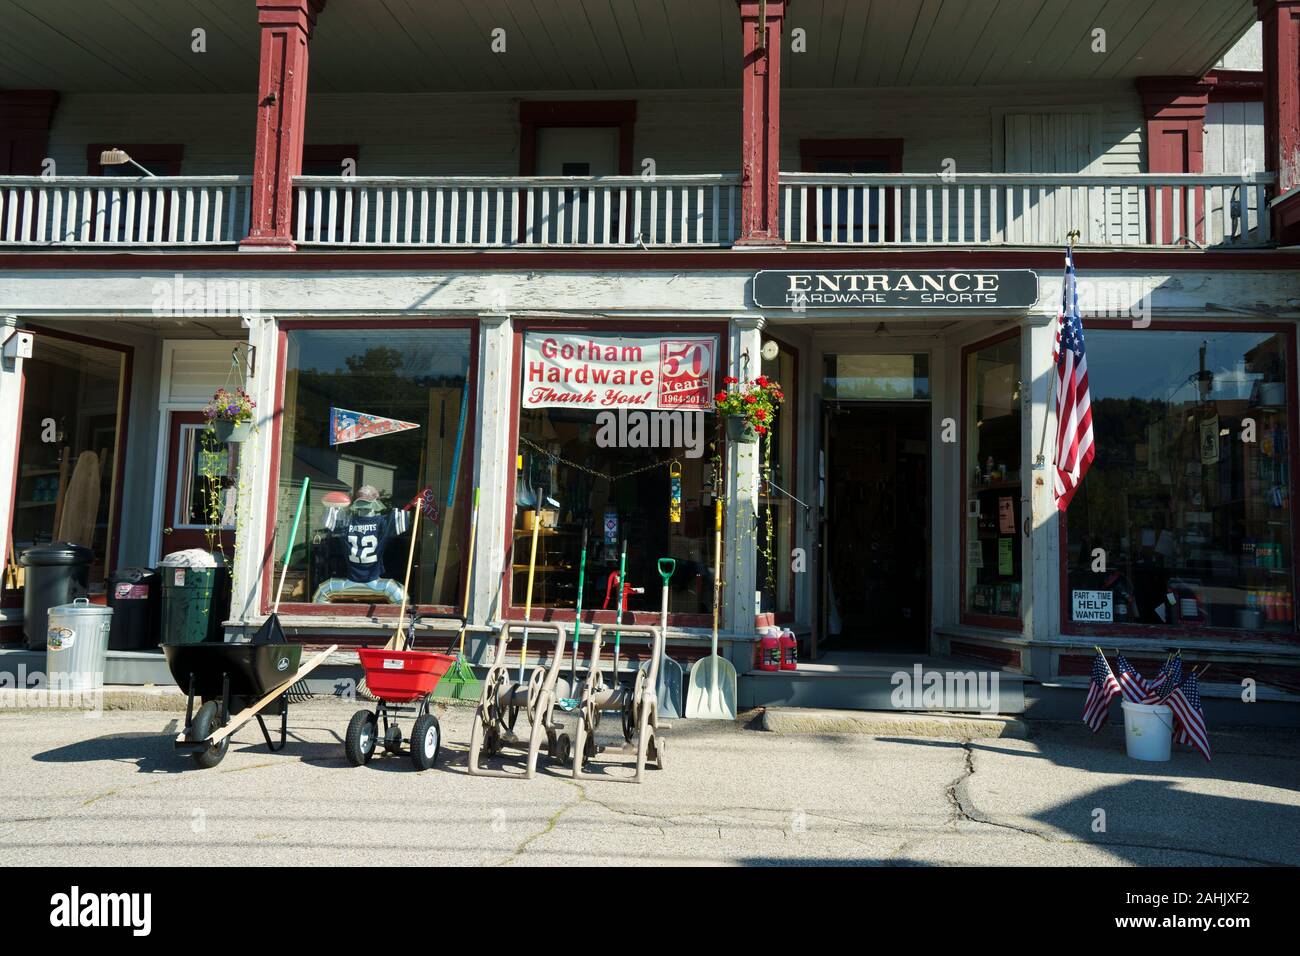 Exterior of an old hardware store with merchandise displayed on the sidewalk, Gorham, New Hampshire, USA. Stock Photo